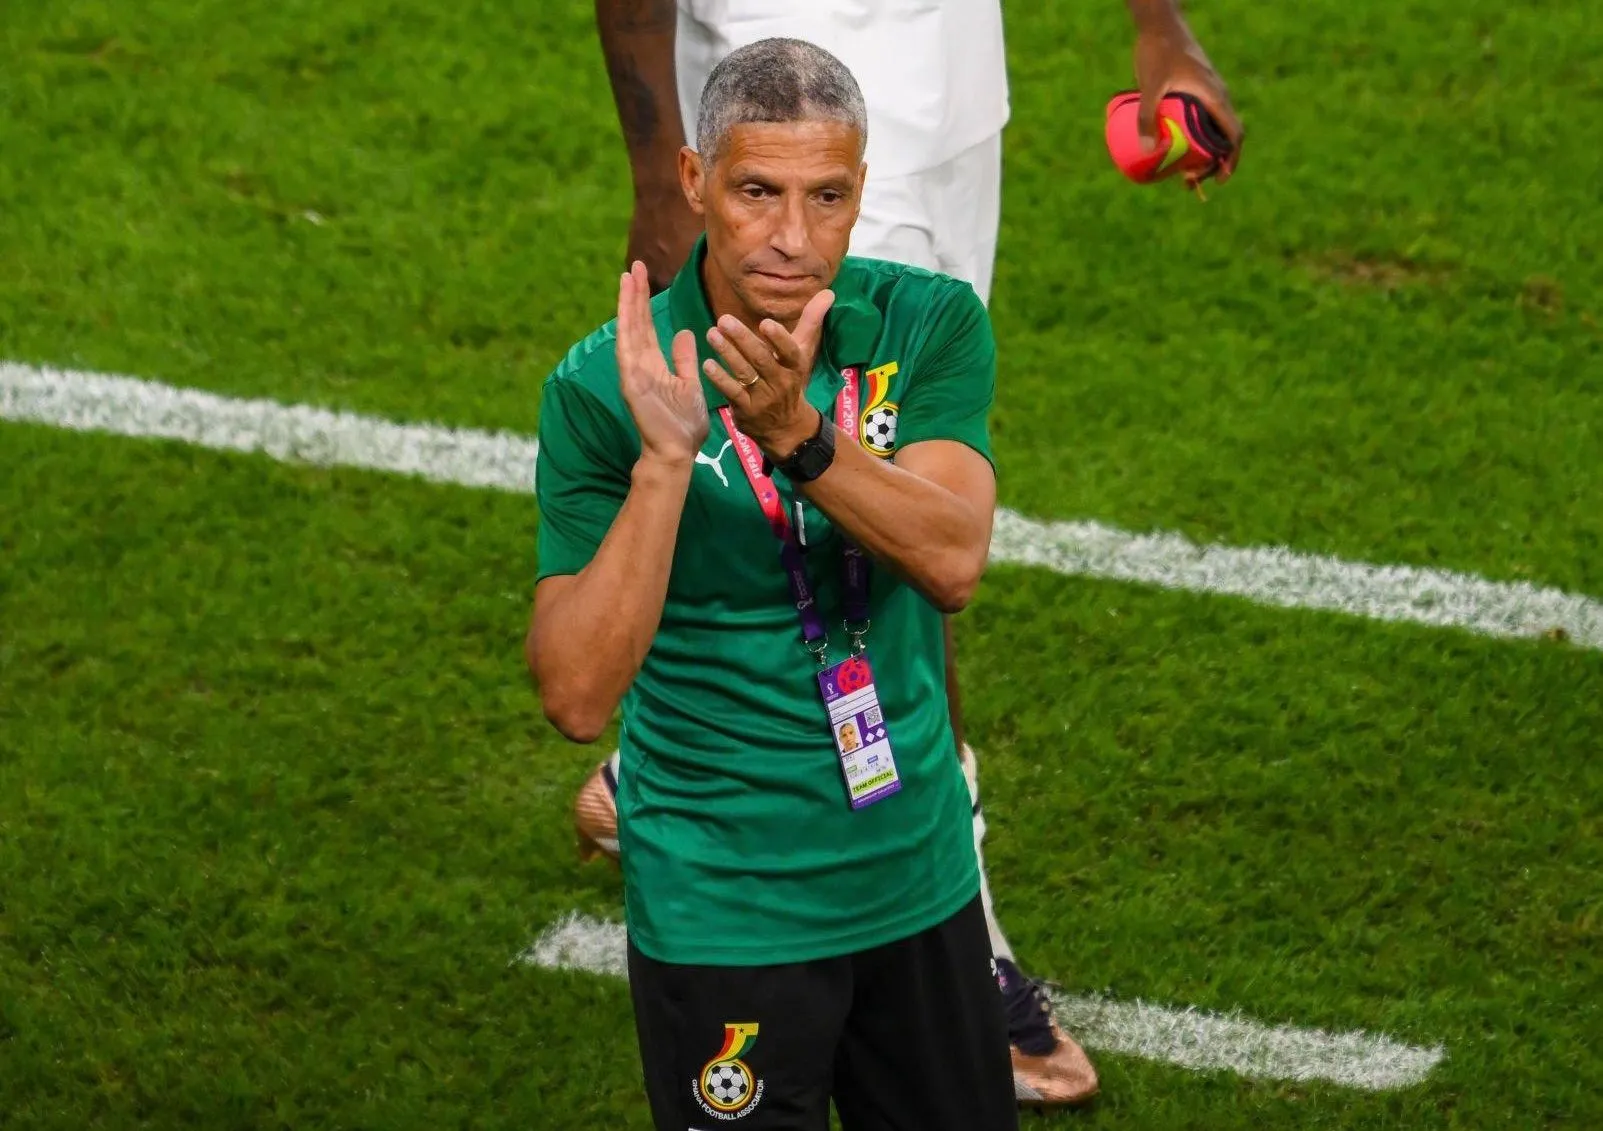 2023 AFCON Qualifiers: We have to make sure we are compact as a team against Angola - Chris Hughton